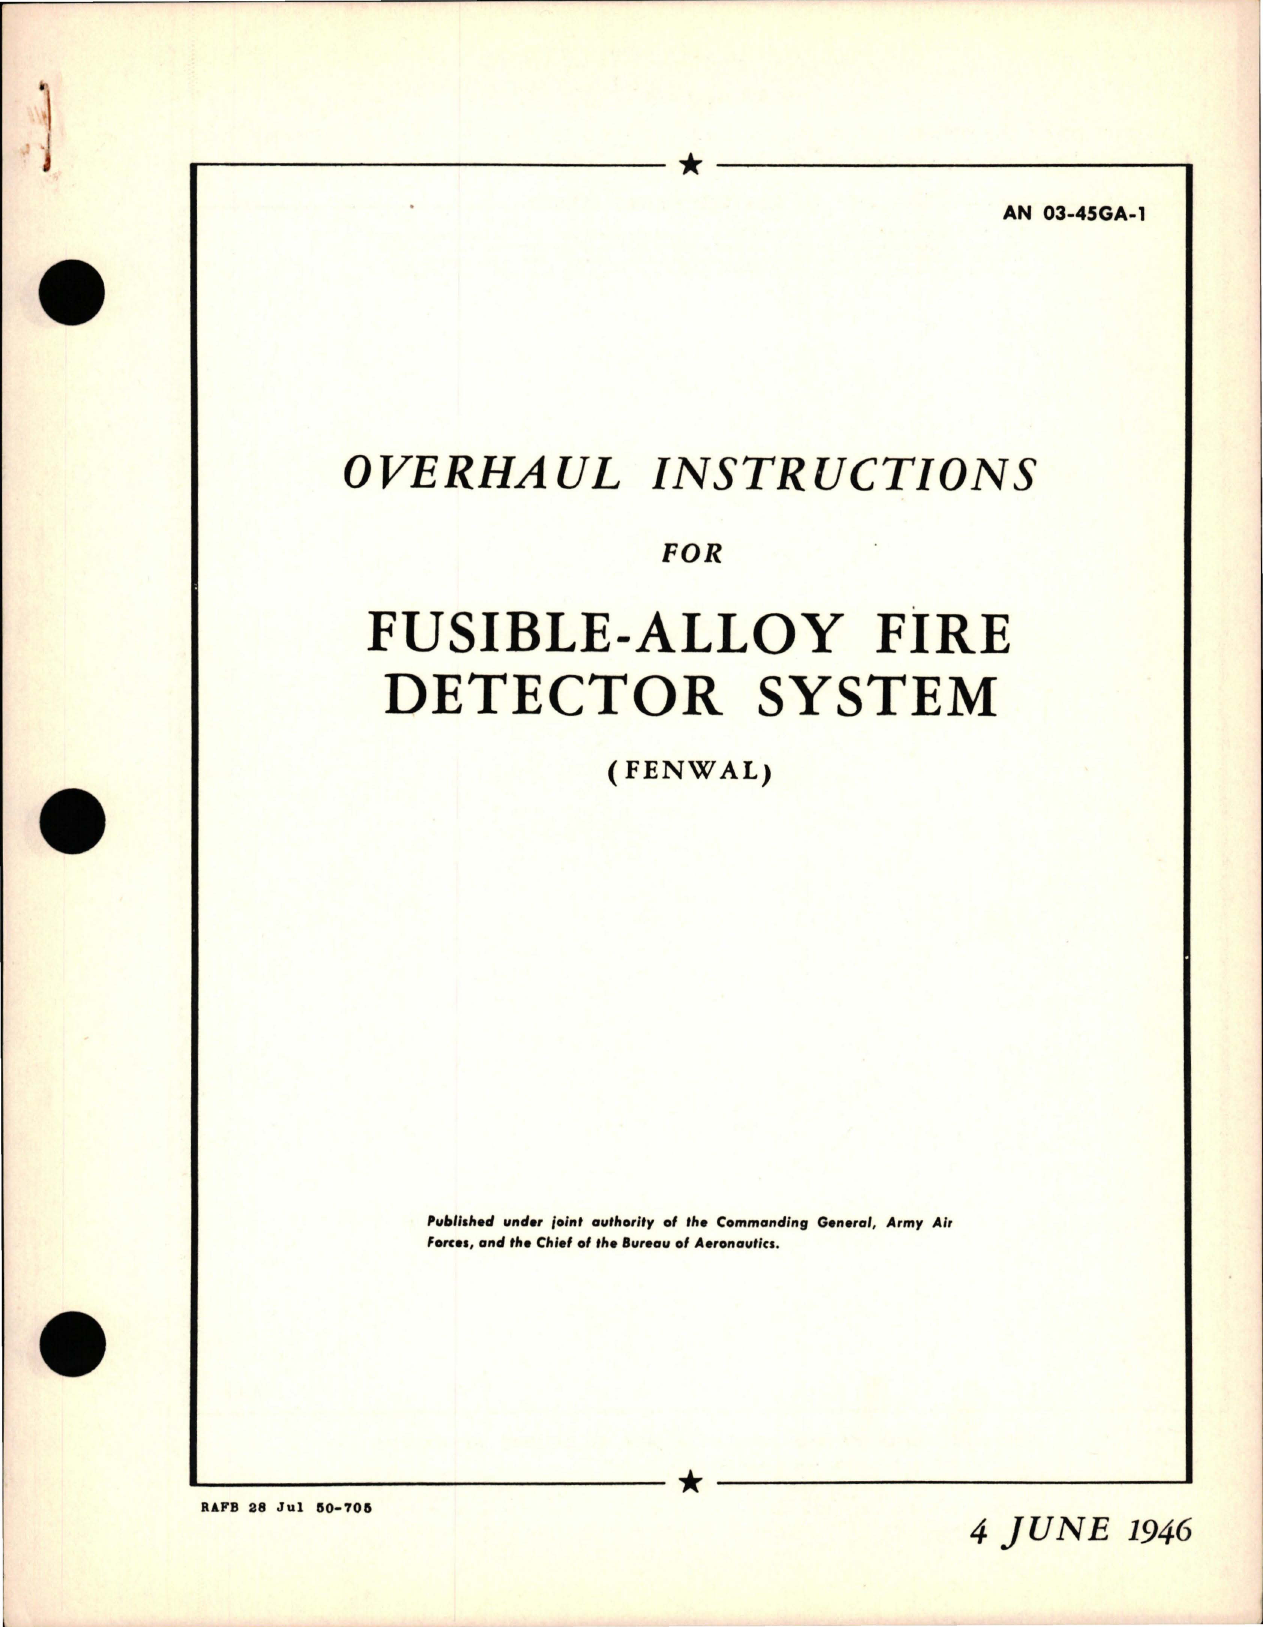 Sample page 1 from AirCorps Library document: Overhaul Instructions for Fusible-Alloy Fire Detector System